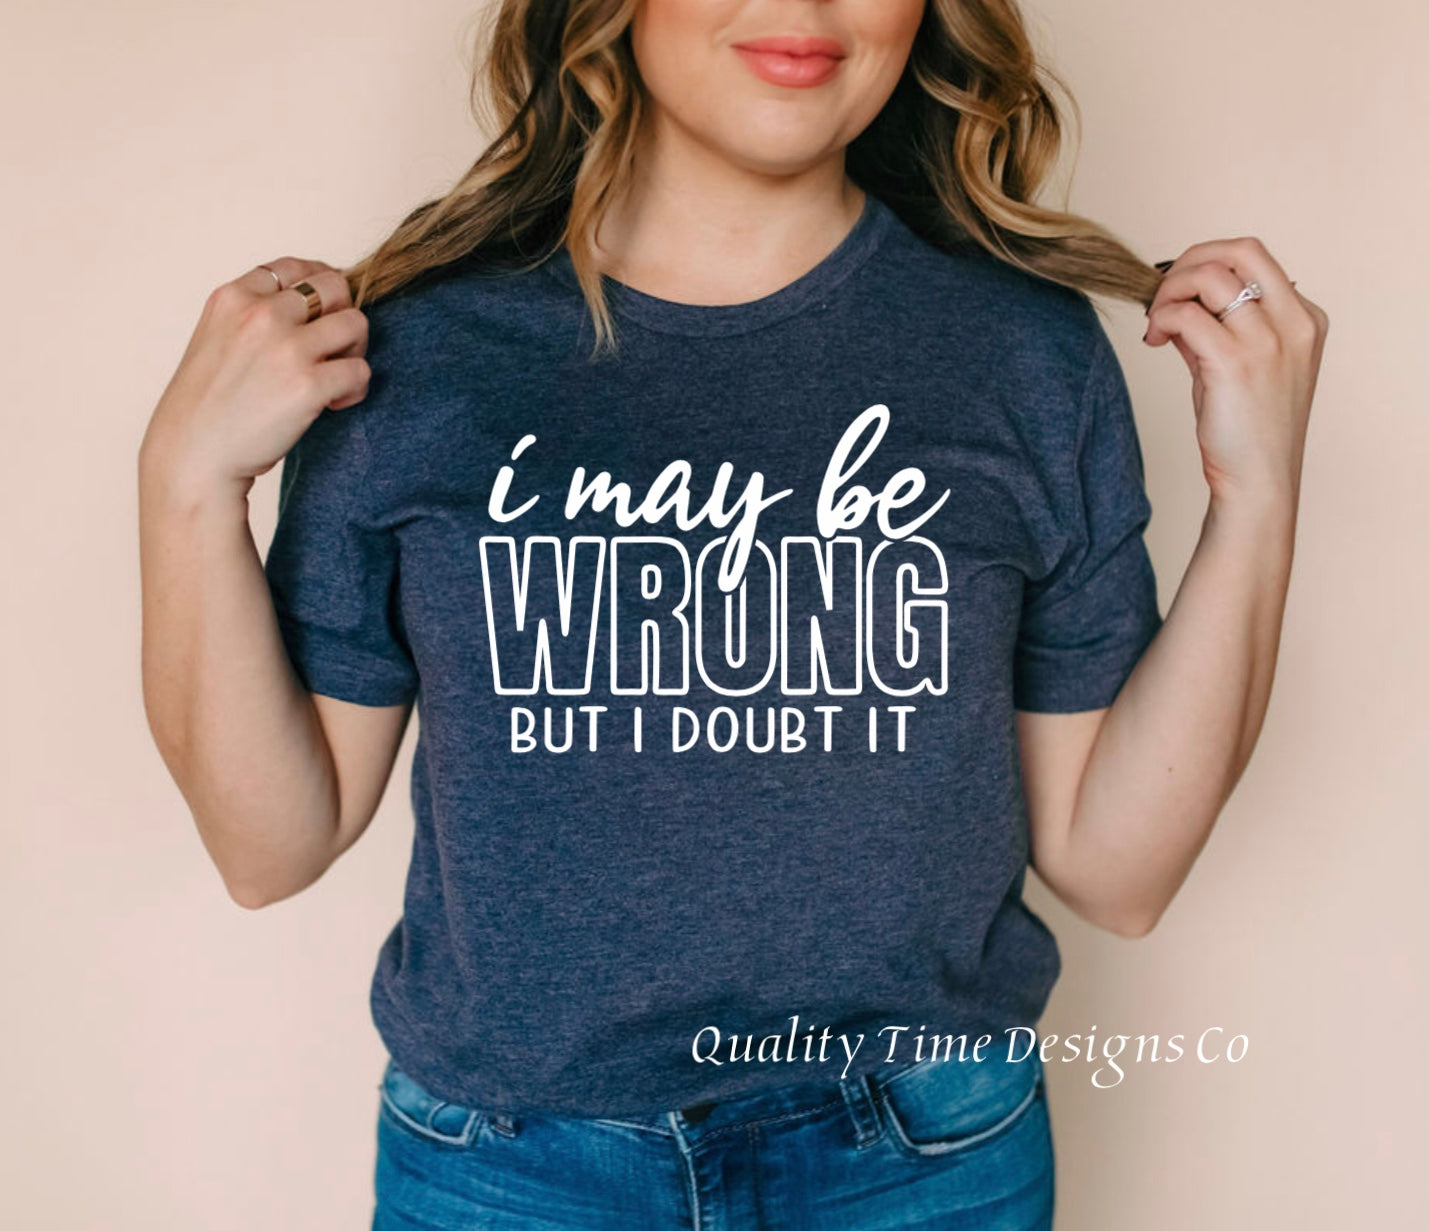 I may be wrong but I doubt it t-shirt 